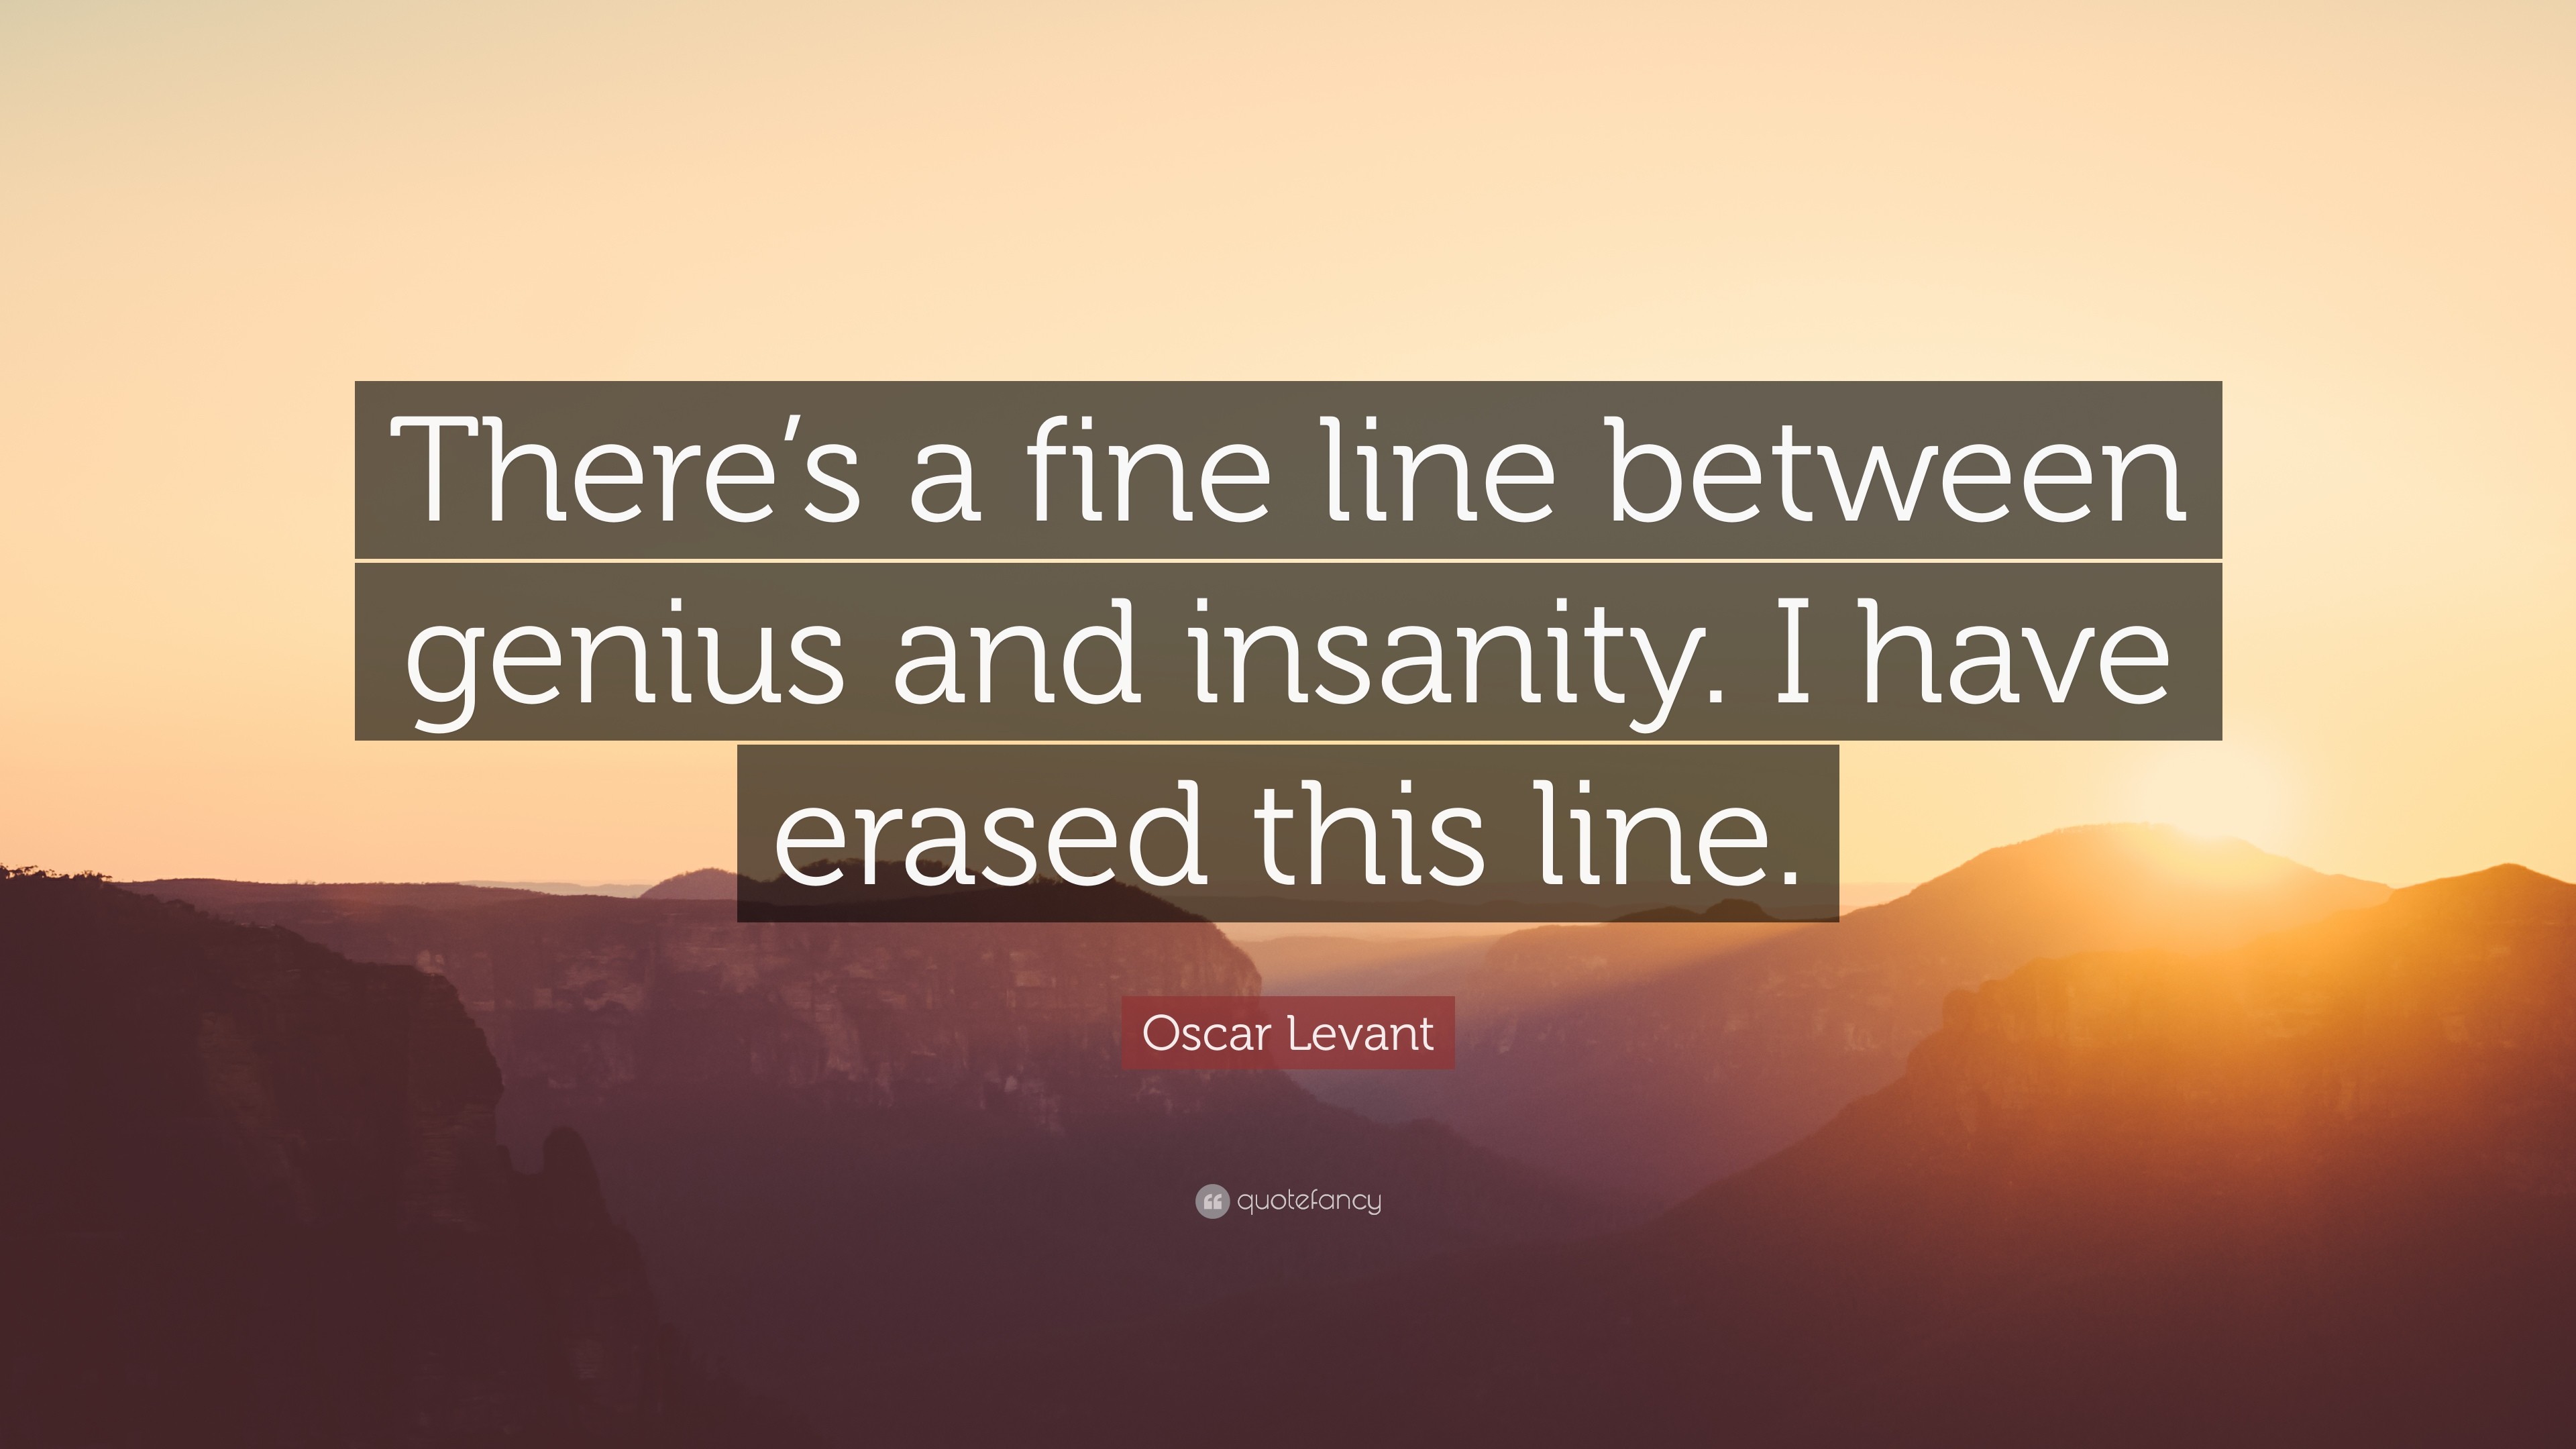 3840x2160 Oscar Levant Quote: “There's a fine line between genius and insanity. I have